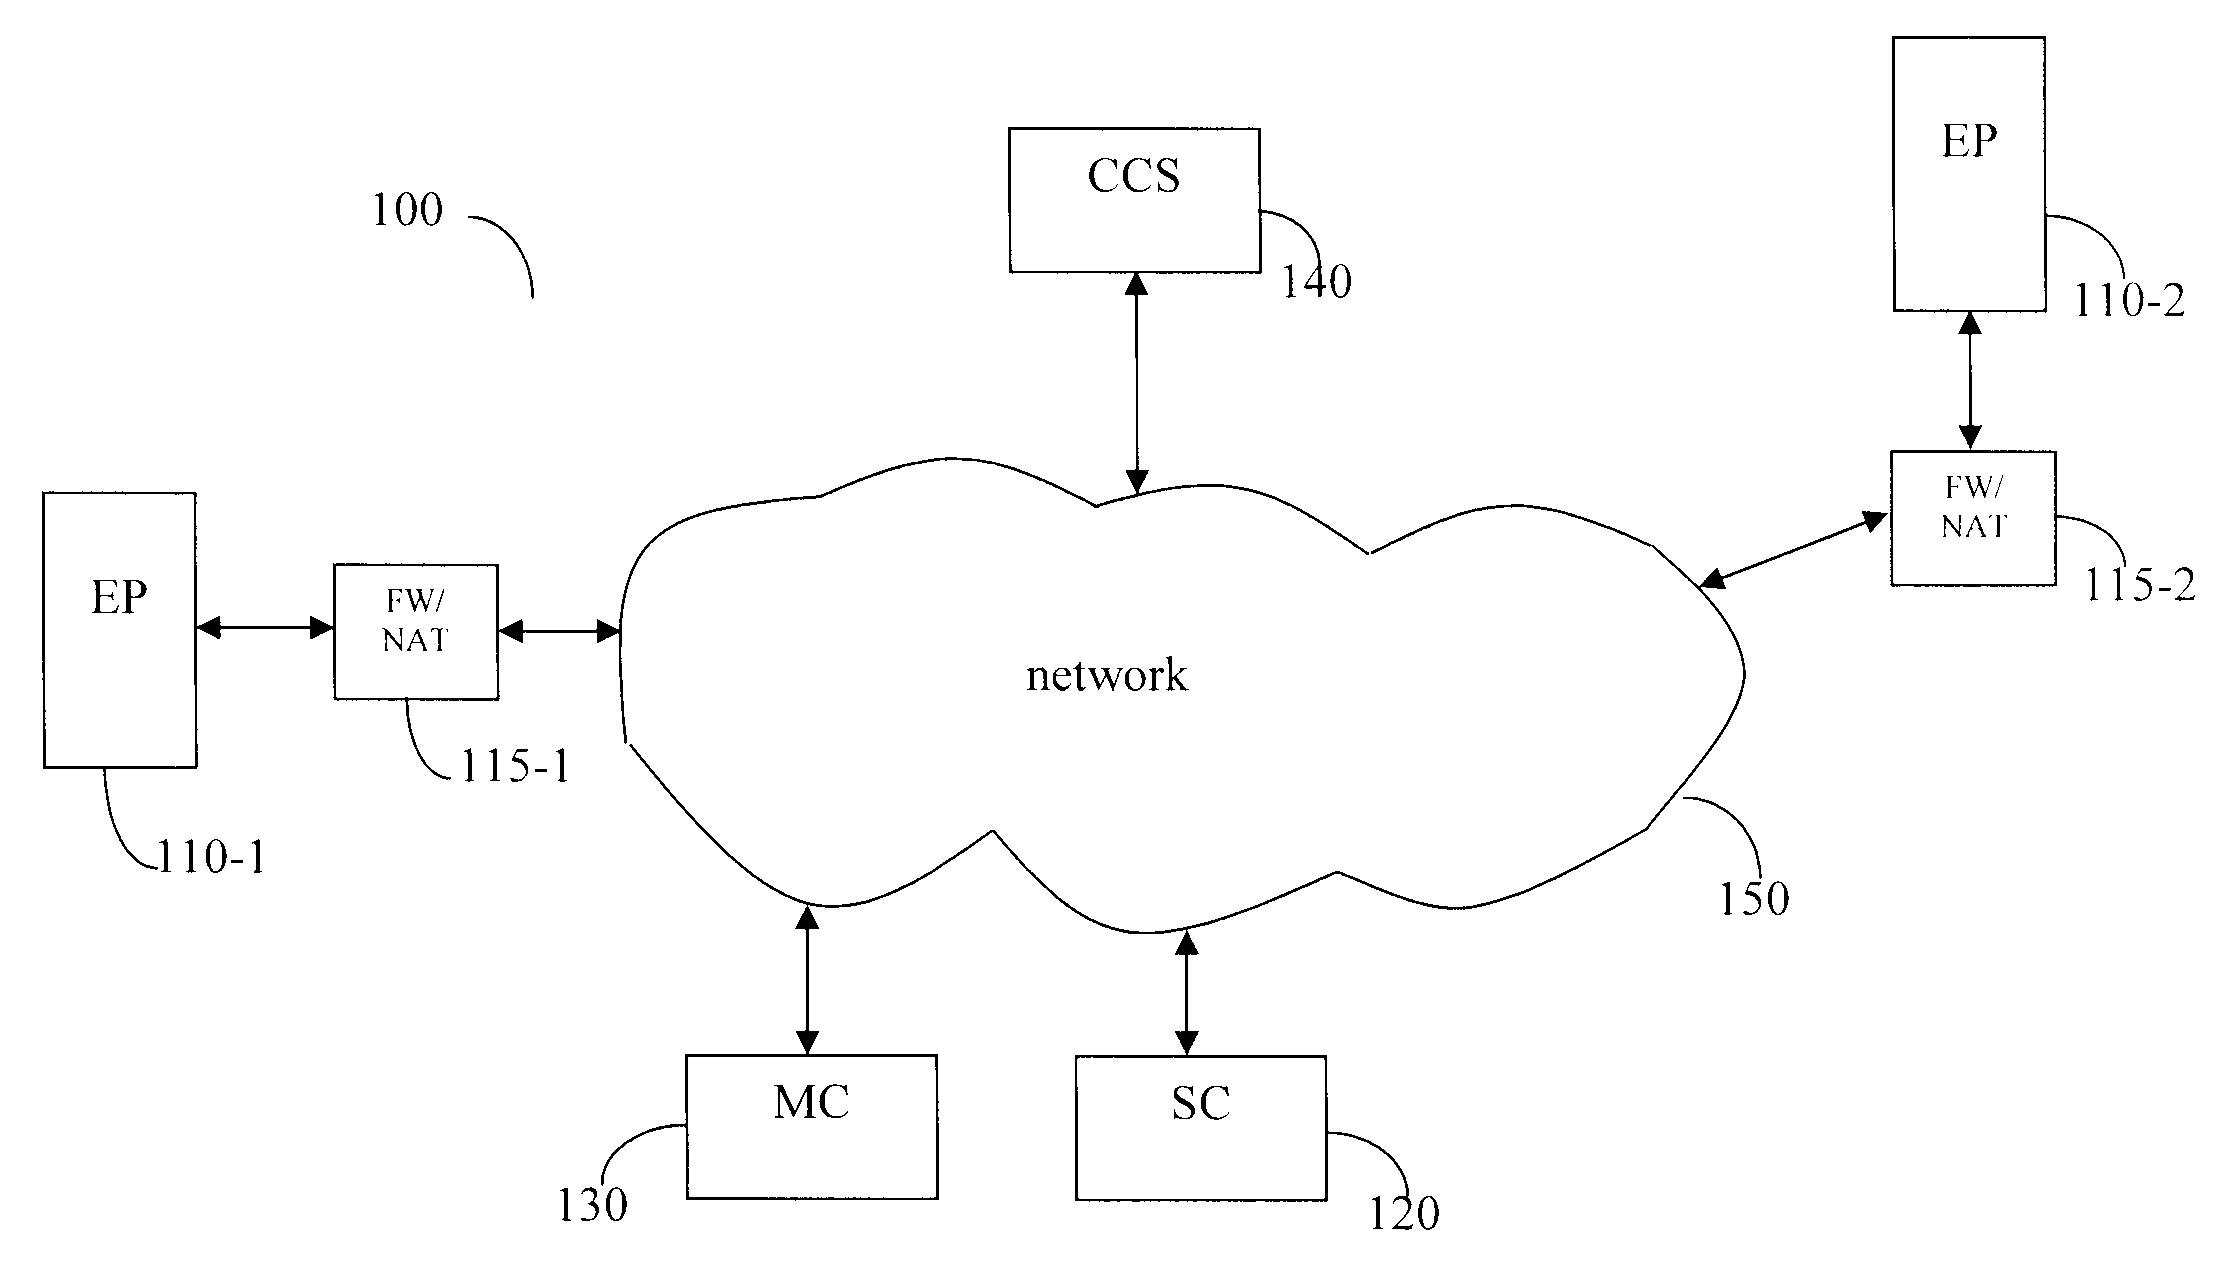 Method of communicating packet multimedia to restricted endpoints